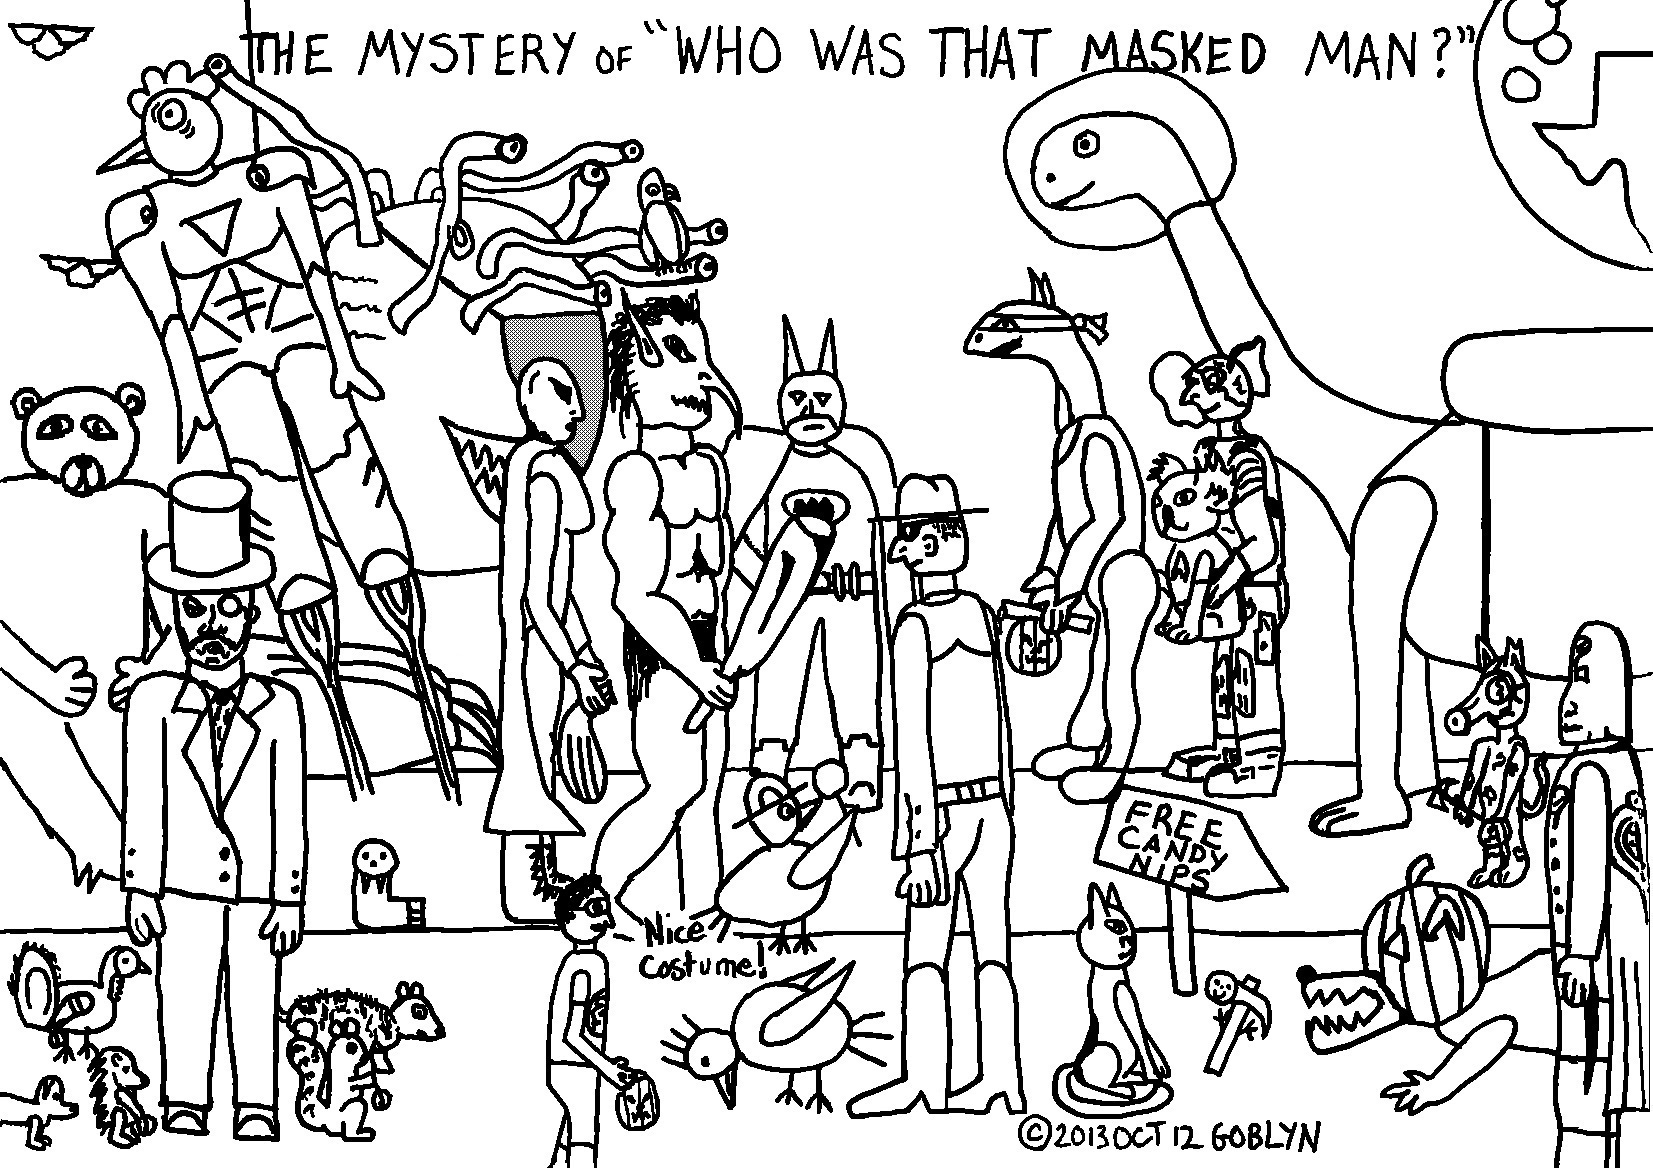 The Mystery of "Who was that Masked Man?"